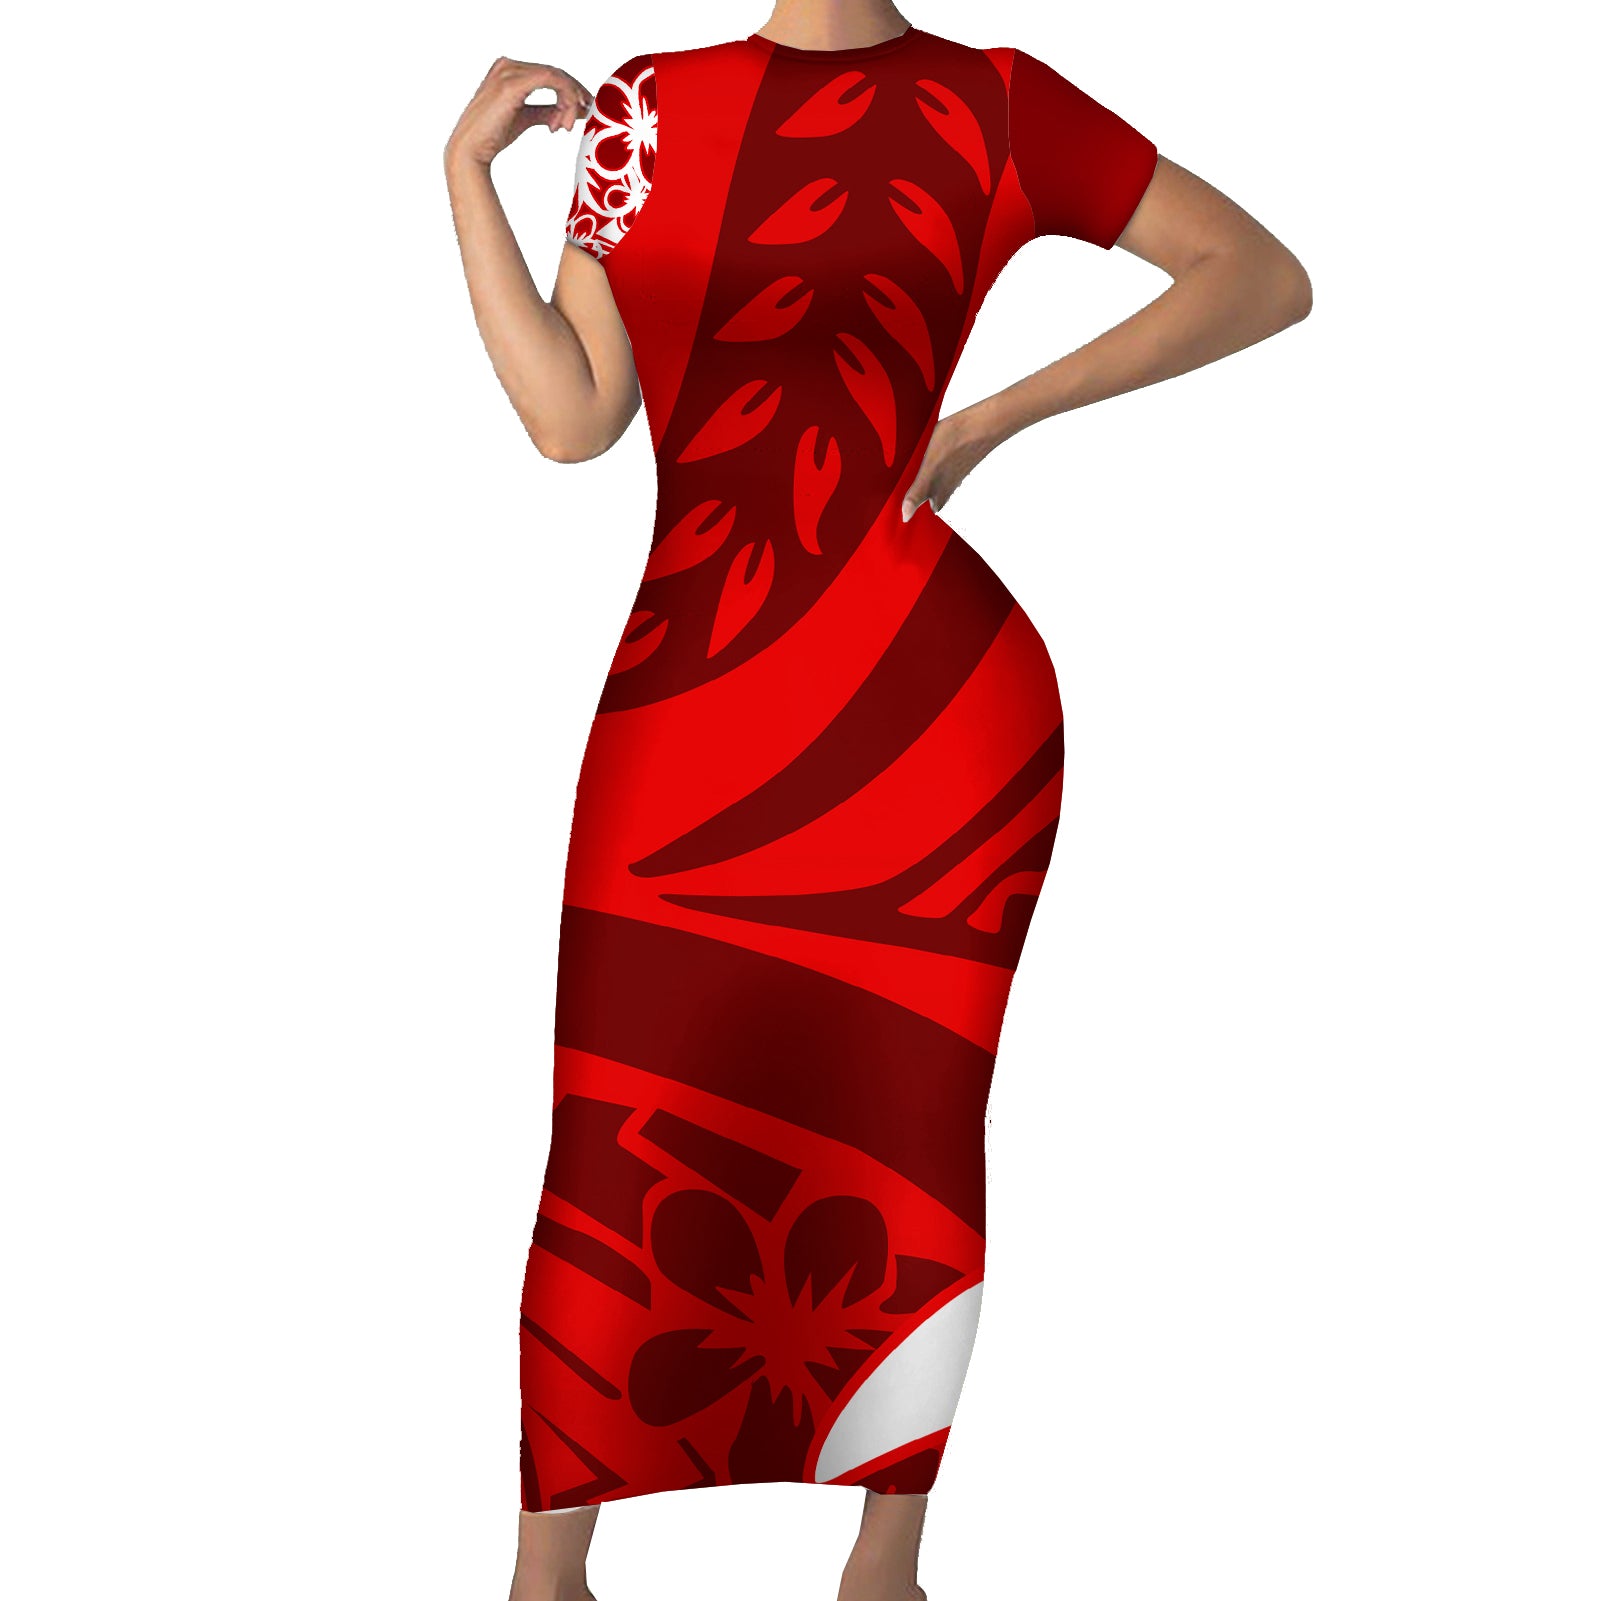 Polynesian Short Sleeve Bodycon Dress Pacific Flower Mix Floral Tribal Tattoo Red Vibe LT9 Long Dress Red - Polynesian Pride